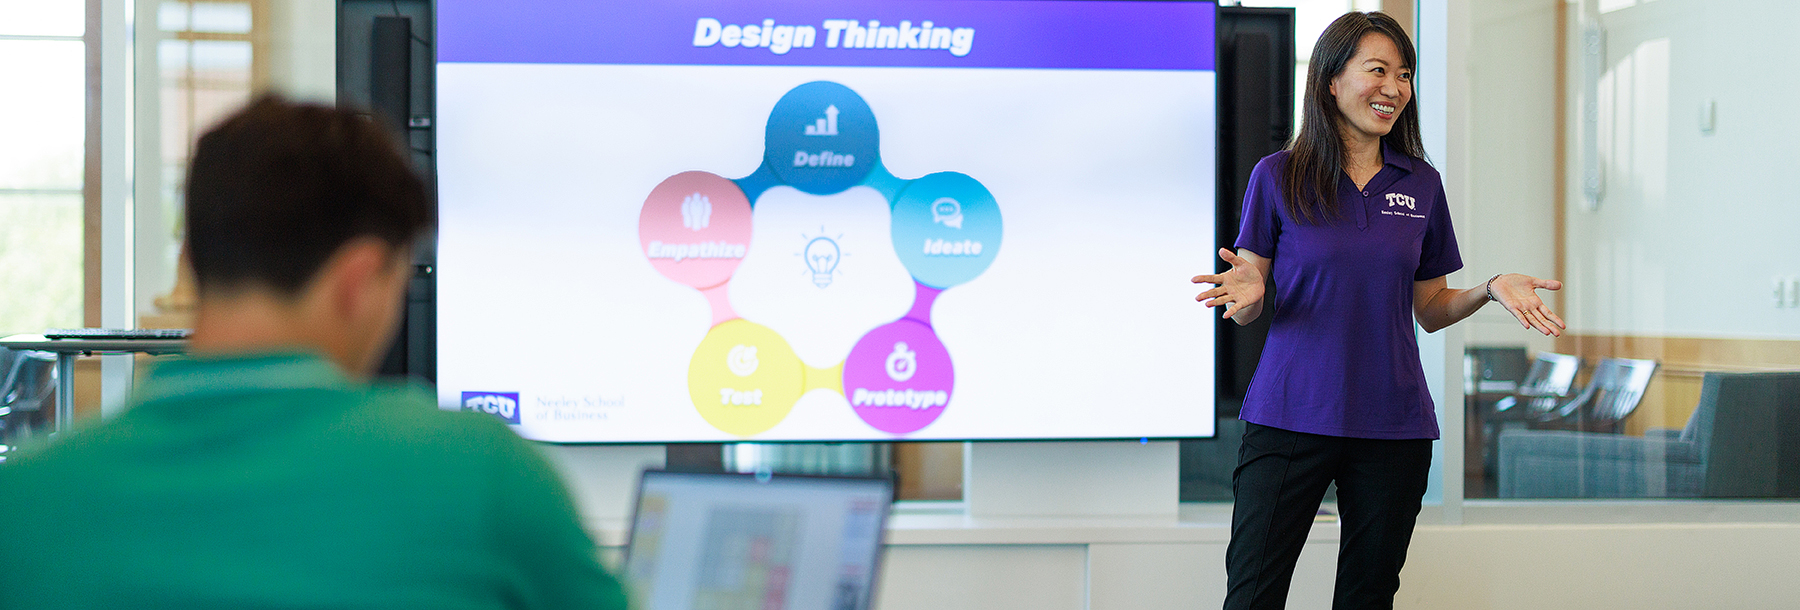 Section Image: Professor lecturing with a slide behind her labeled Design Thinking 